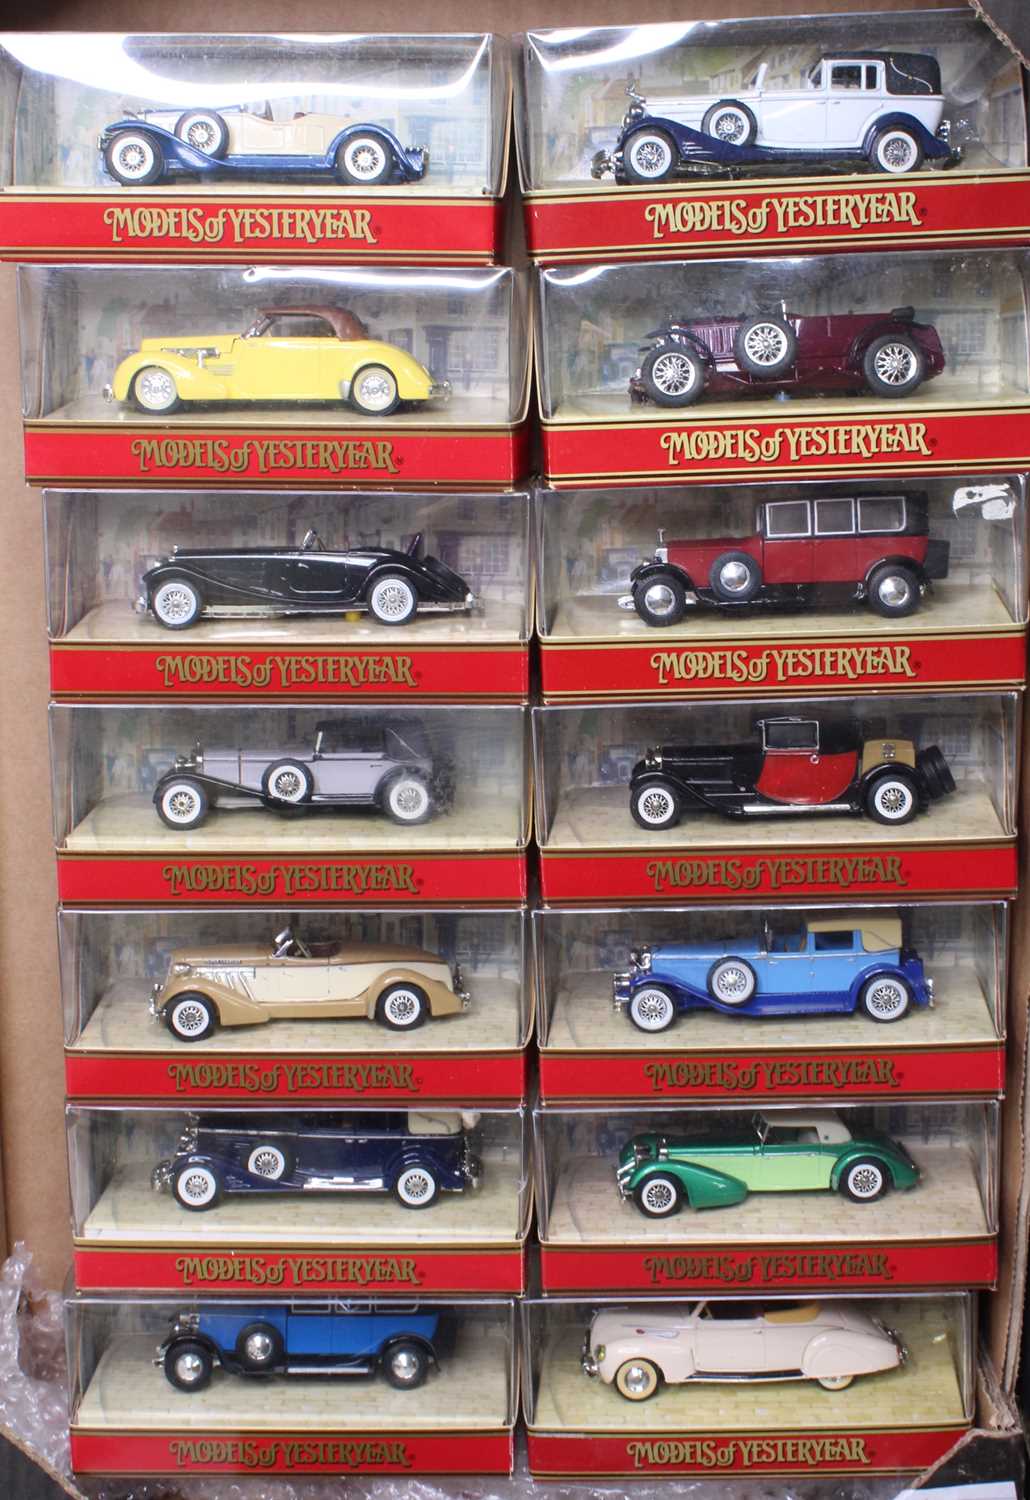 42 various boxed Matchbox Models of Yesteryear, all housed in original red ground window boxes to - Image 3 of 4